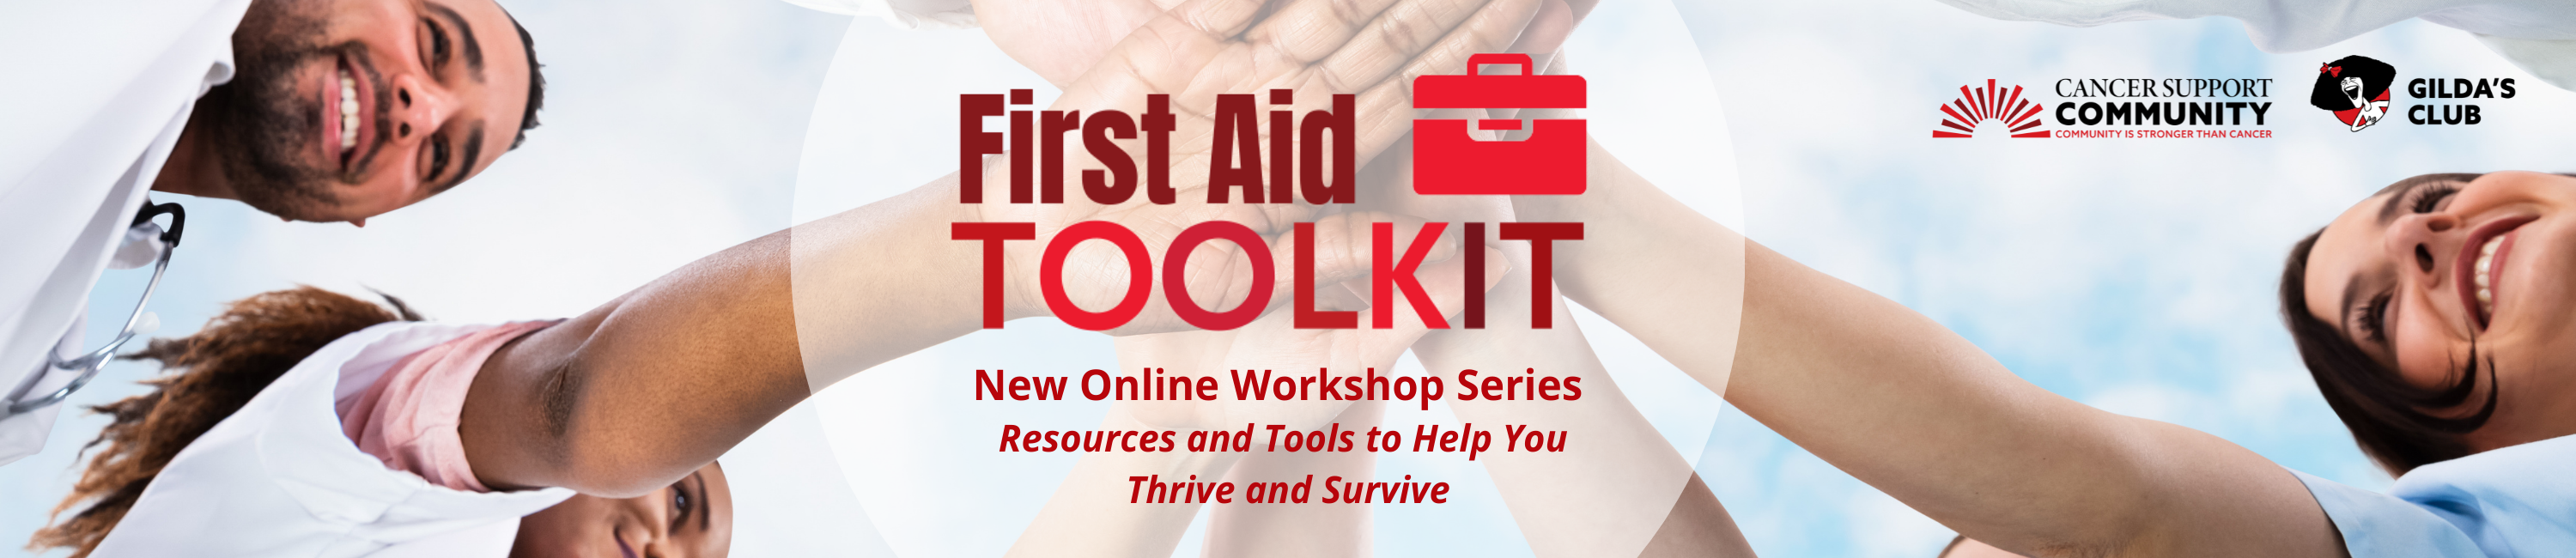 First Aid Toolkit with people putting hands together